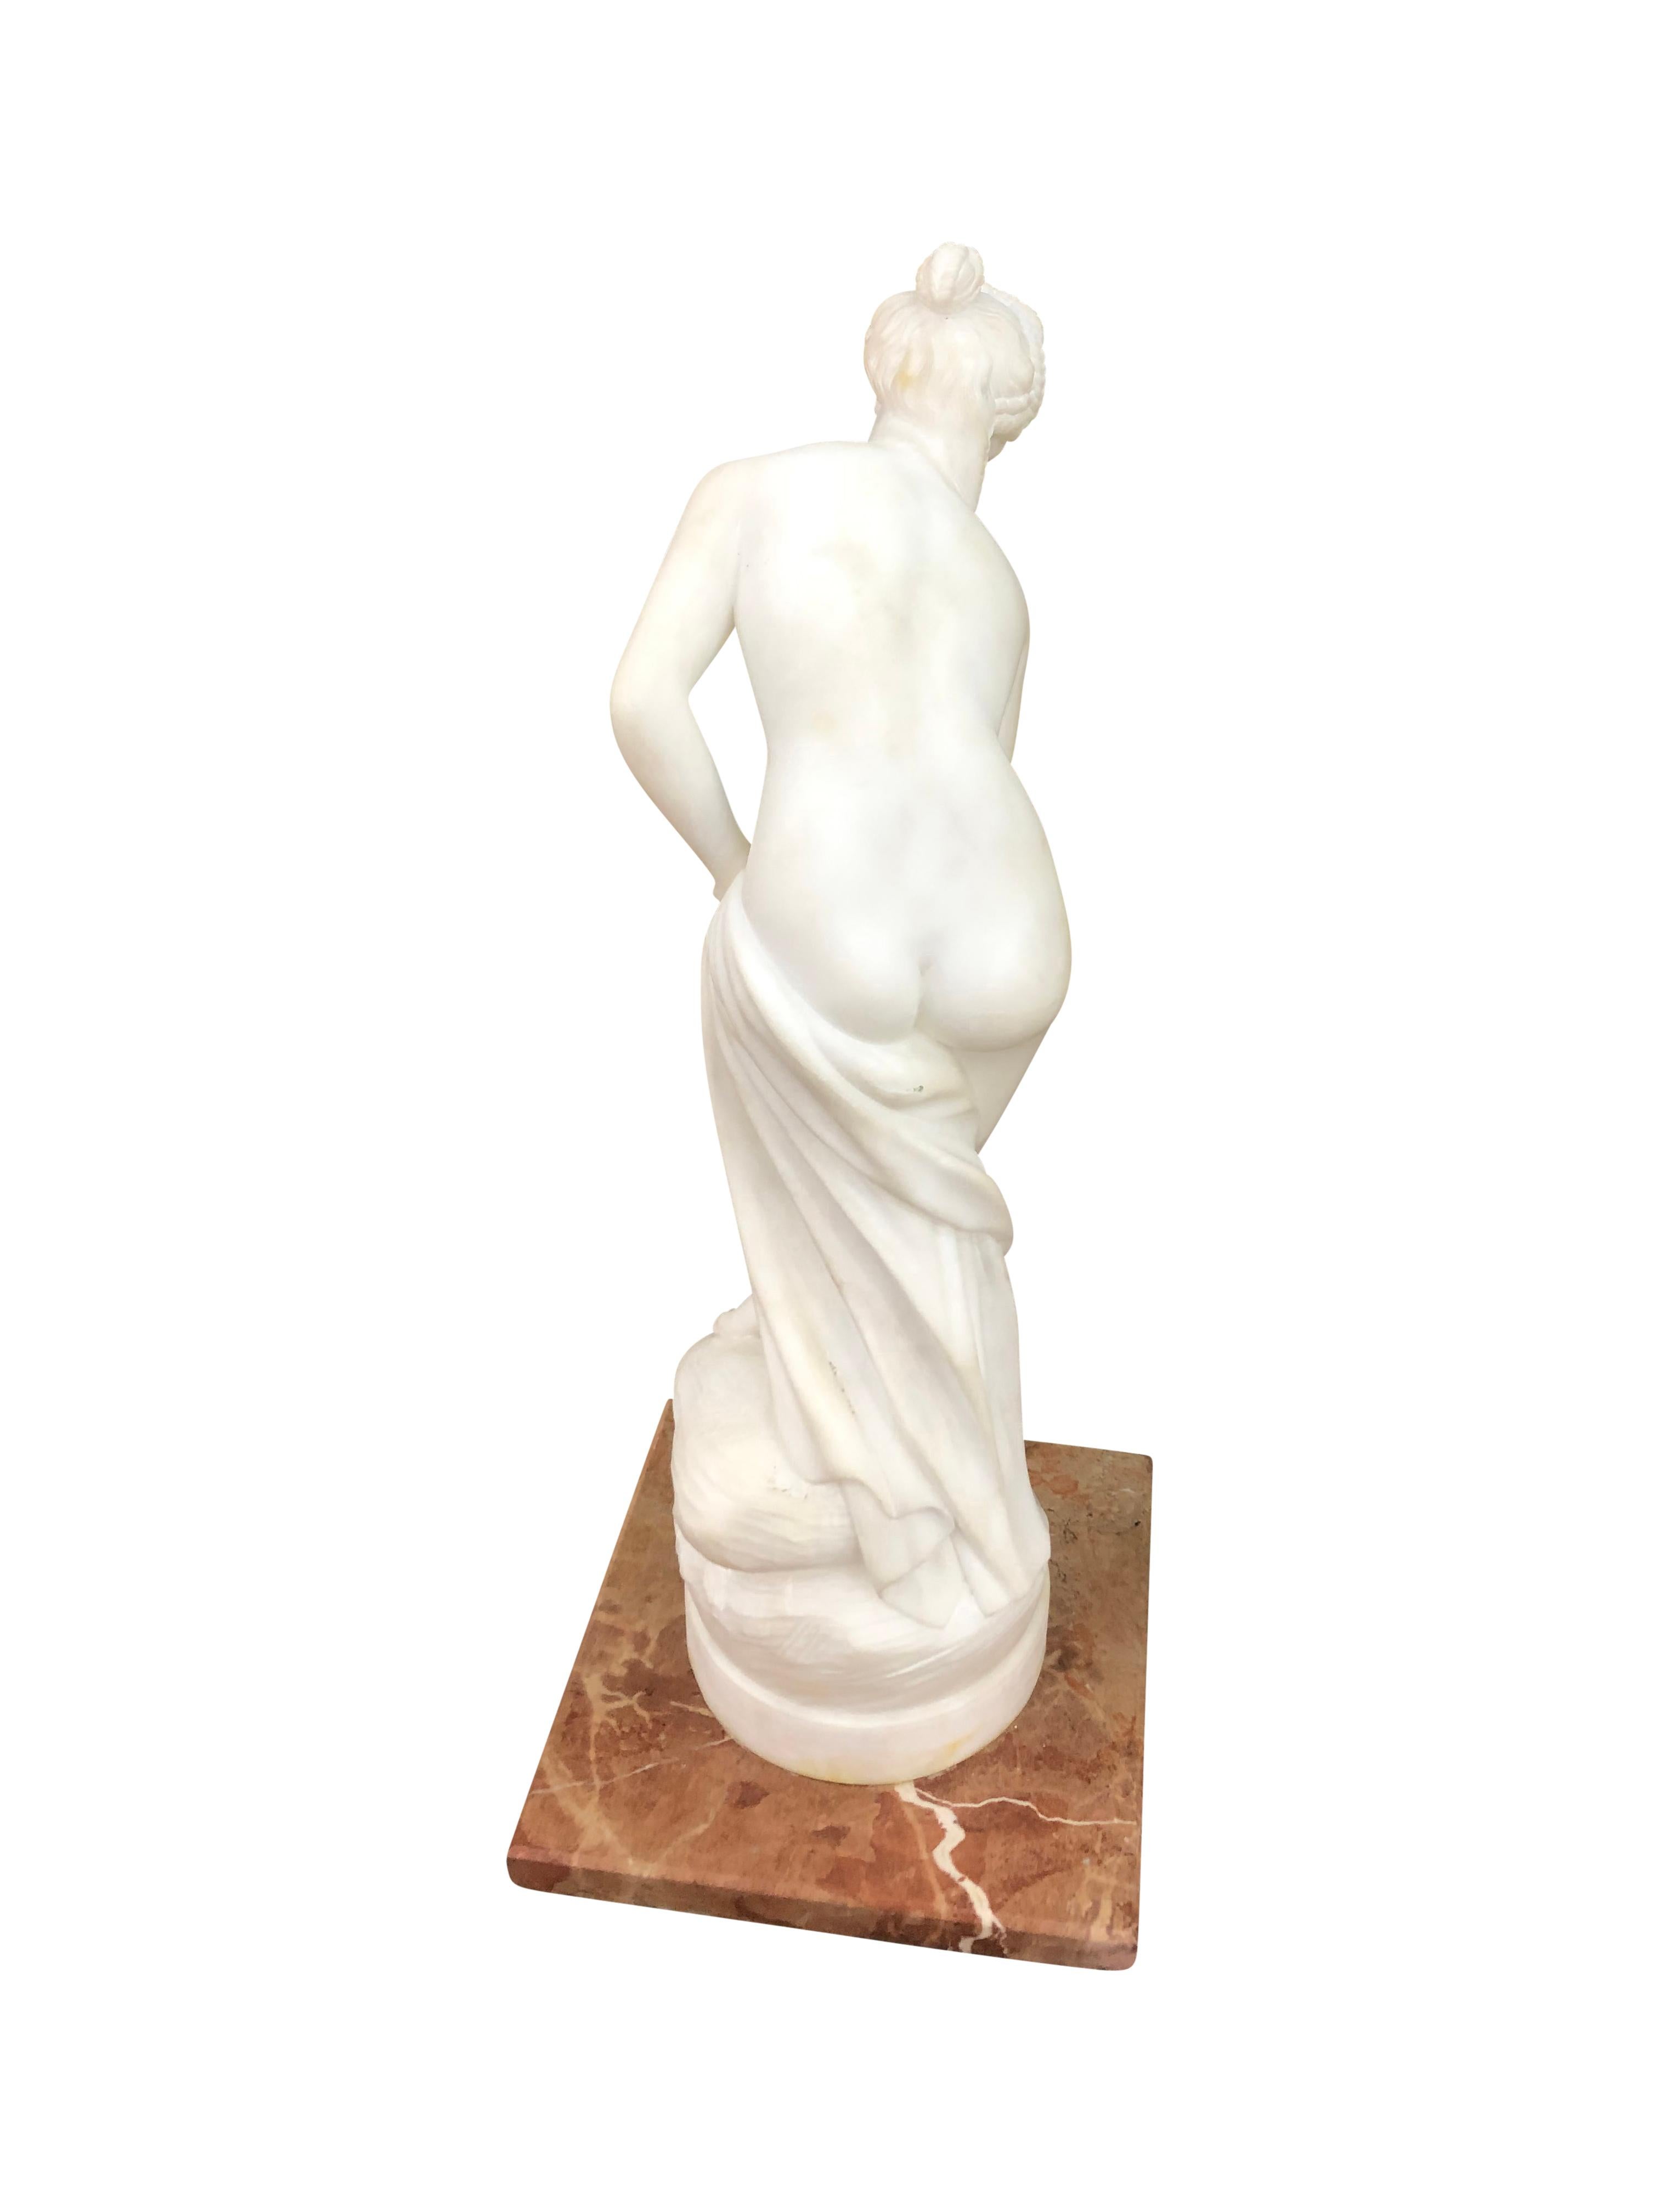 Pair of Antique Italian Marble Sculpture of Classical Female Nude Figures For Sale 3